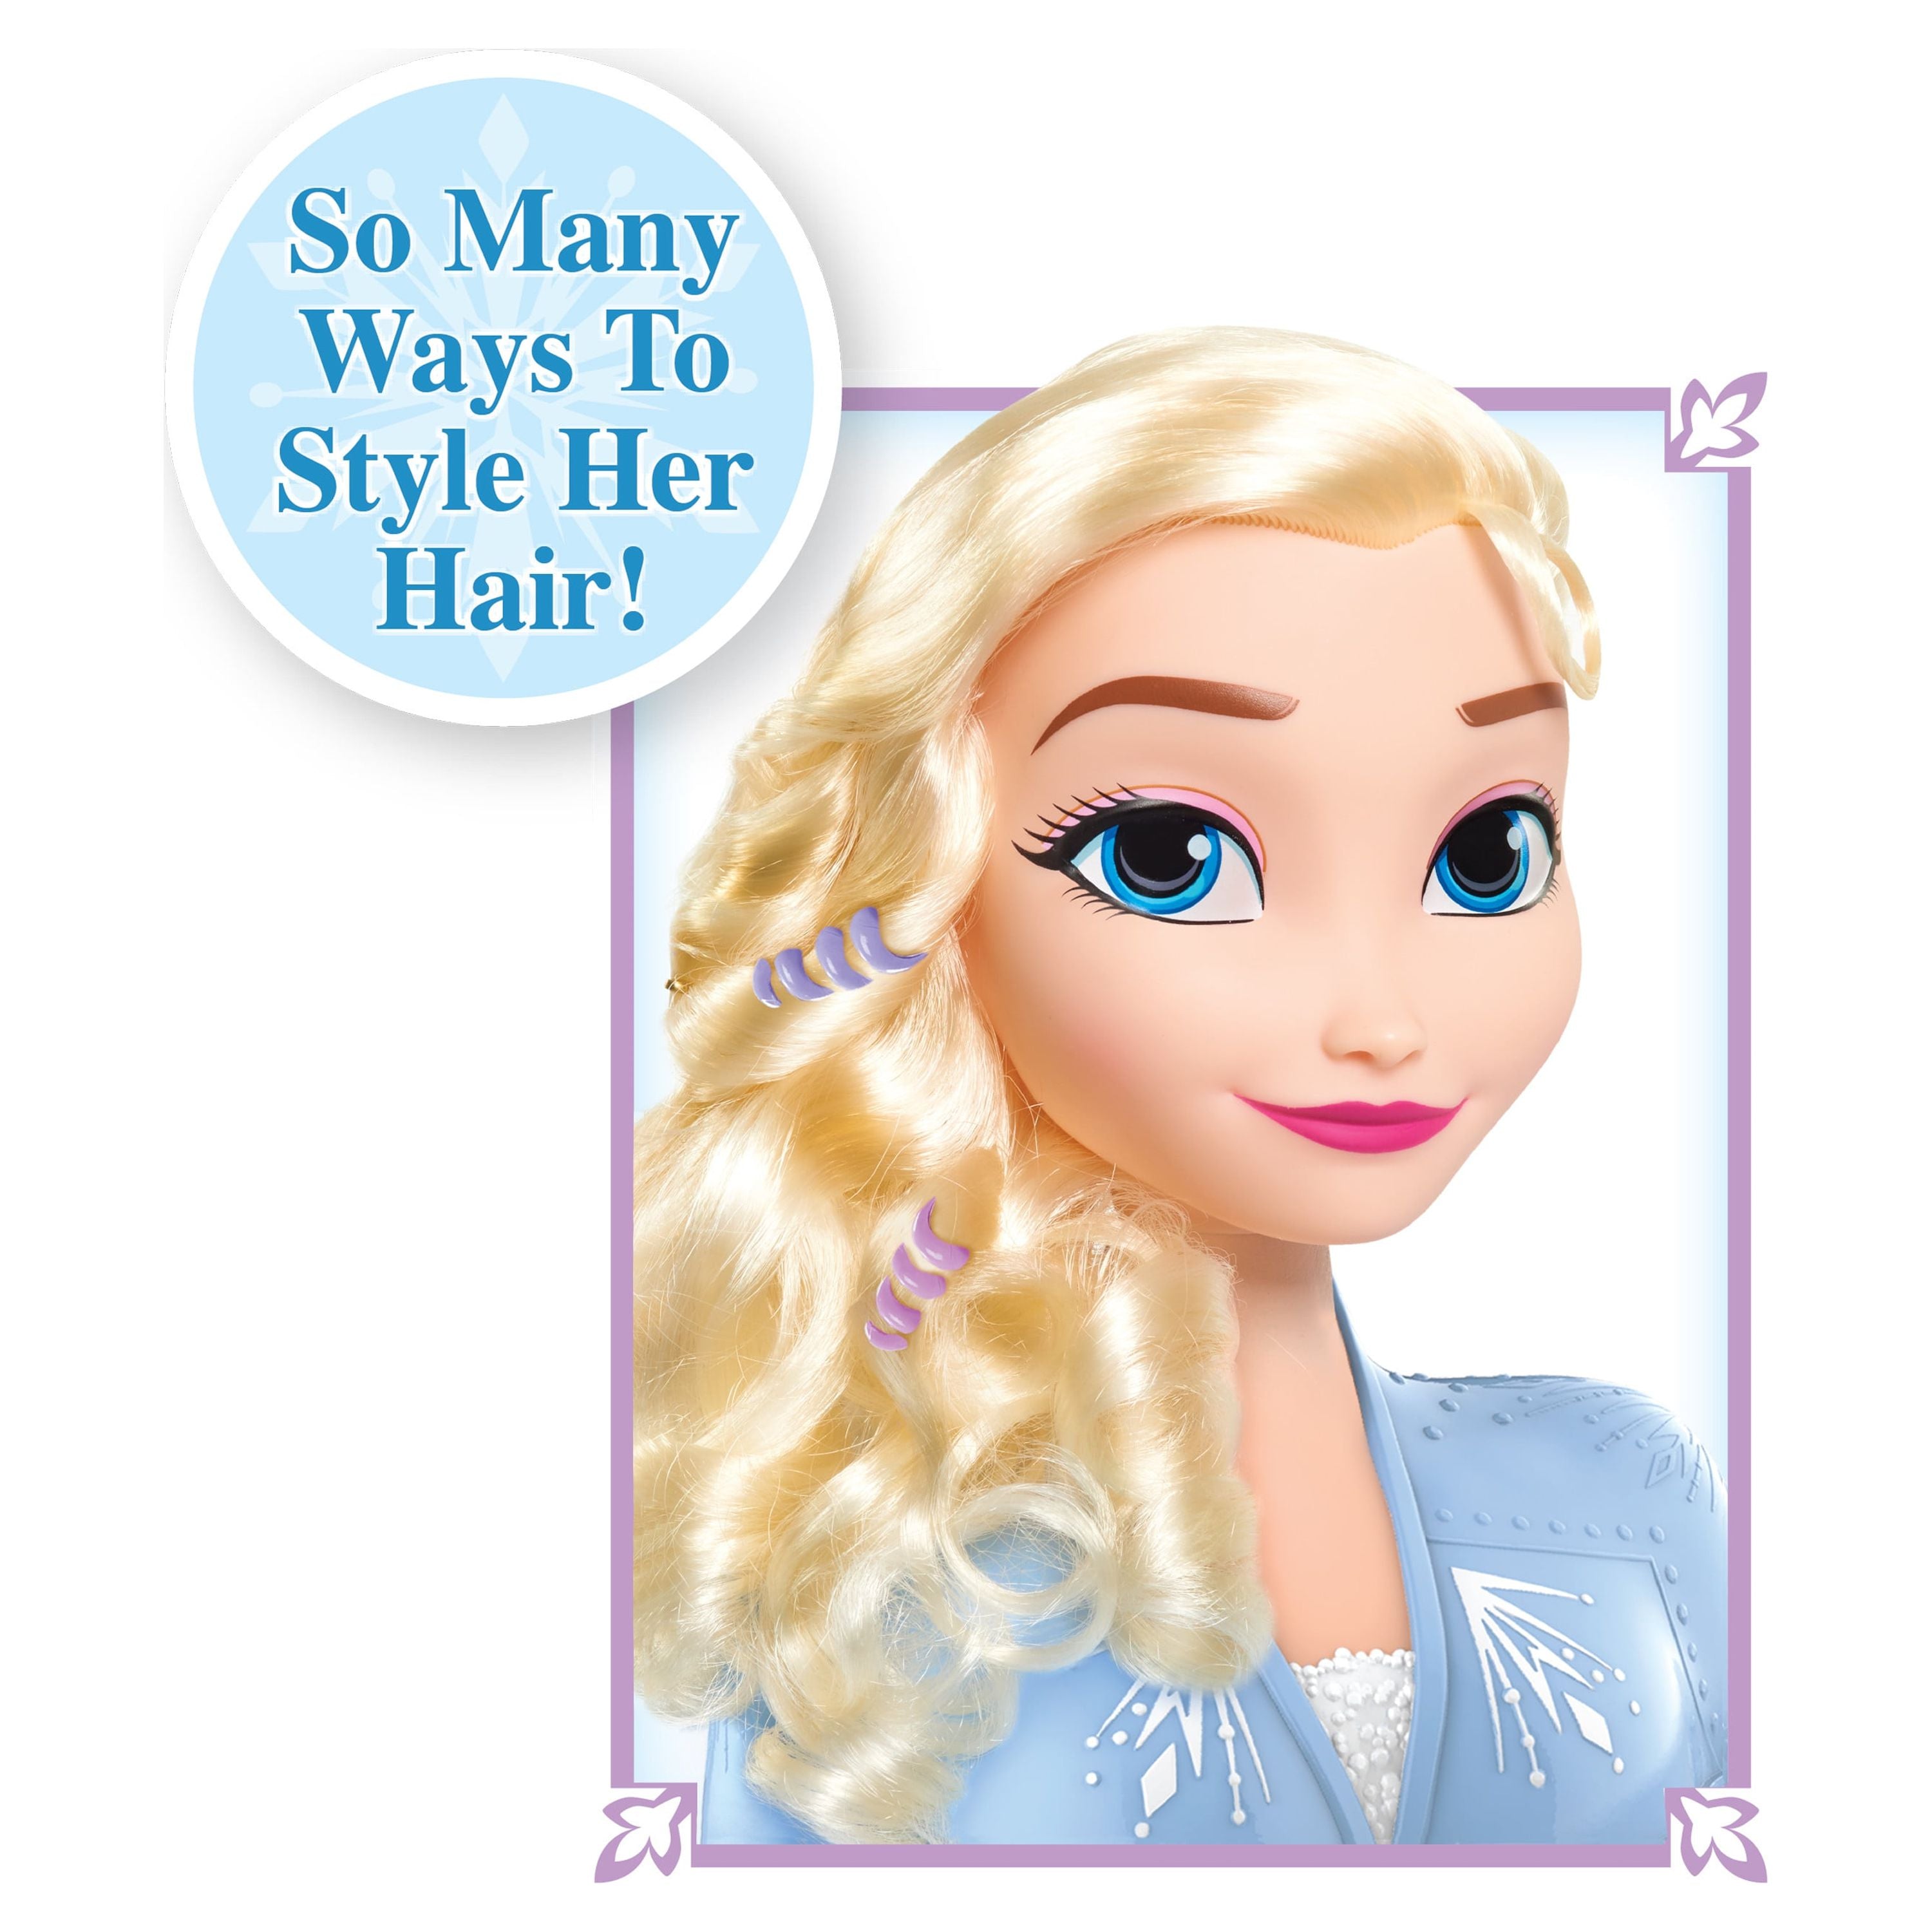 Disney Frozen 2 Elsa Styling Head, 18-Pieces Include Wear and Share Accessories, Blonde, Hair Styling for Kids, Kids Toys for Ages 3 up | MTTS135